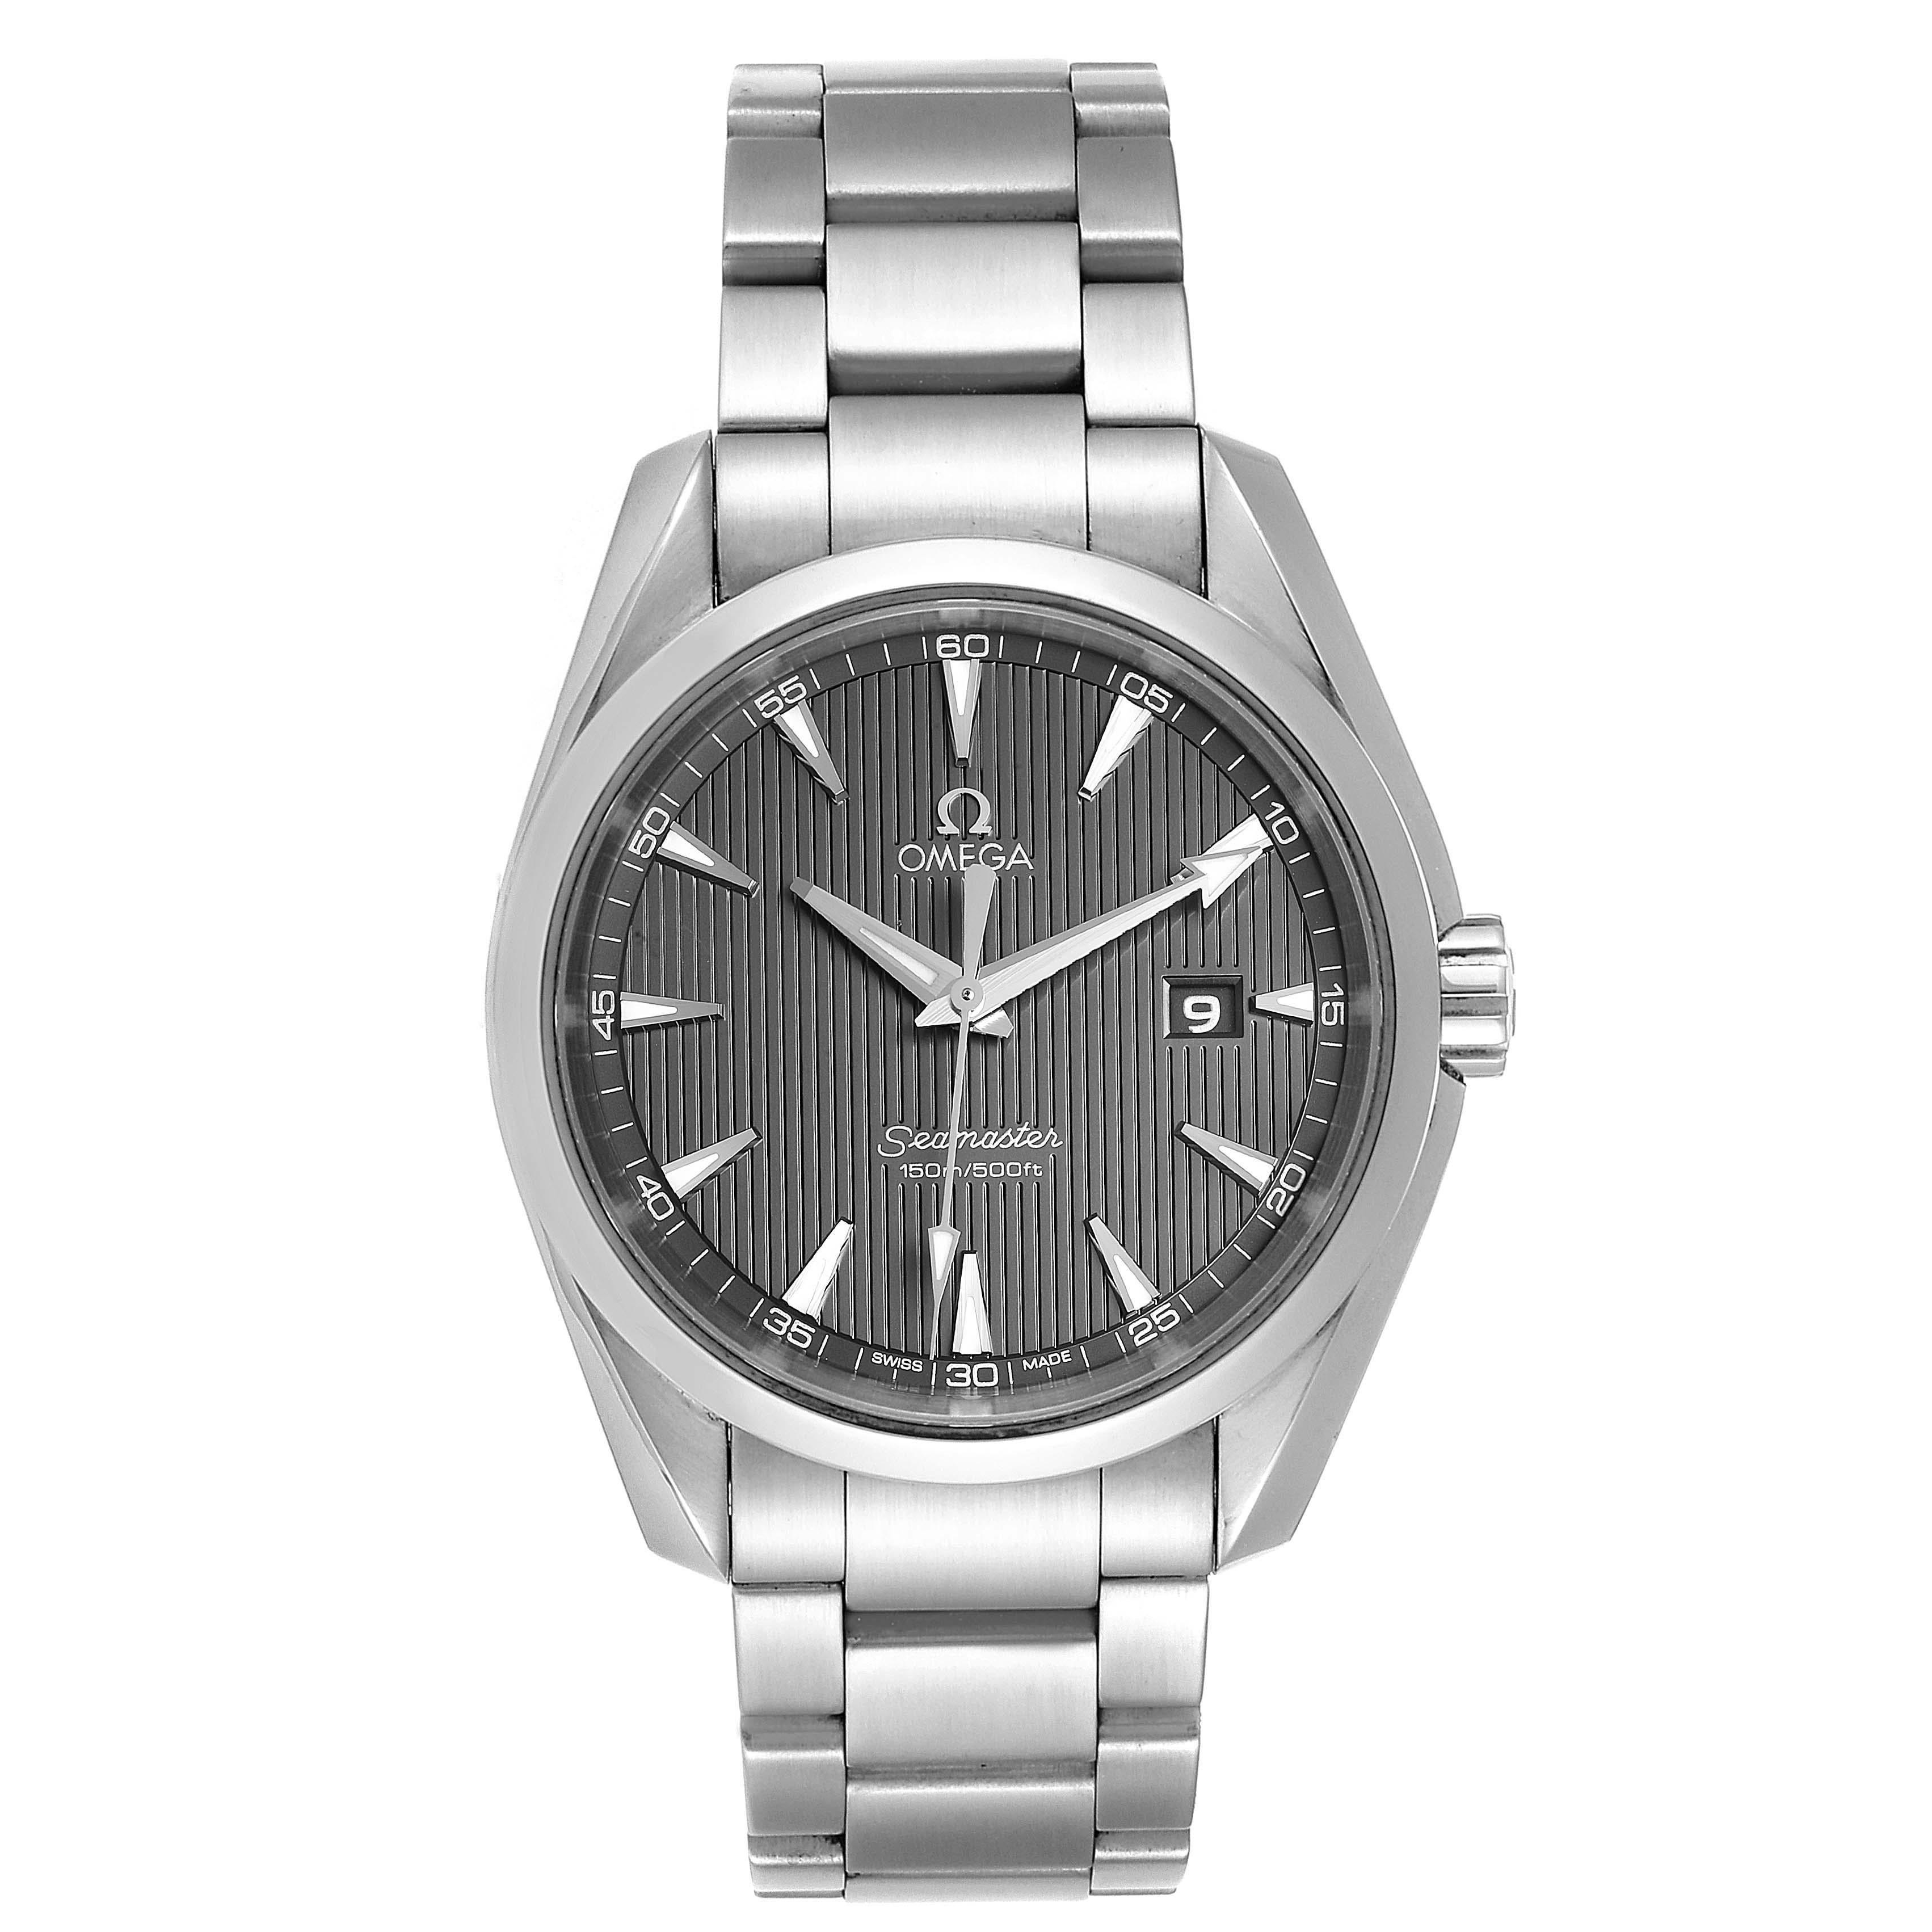 Omega Seamaster Aqua Terra Mens Watch 231.10.39.60.06.001. Quartz precision movement with rhodium-plated finish. Stainless steel round case 38.5 mm in diameter. Stainless steel bezel. Scratch resistant sapphire crystal. Grey teak dial with luminous